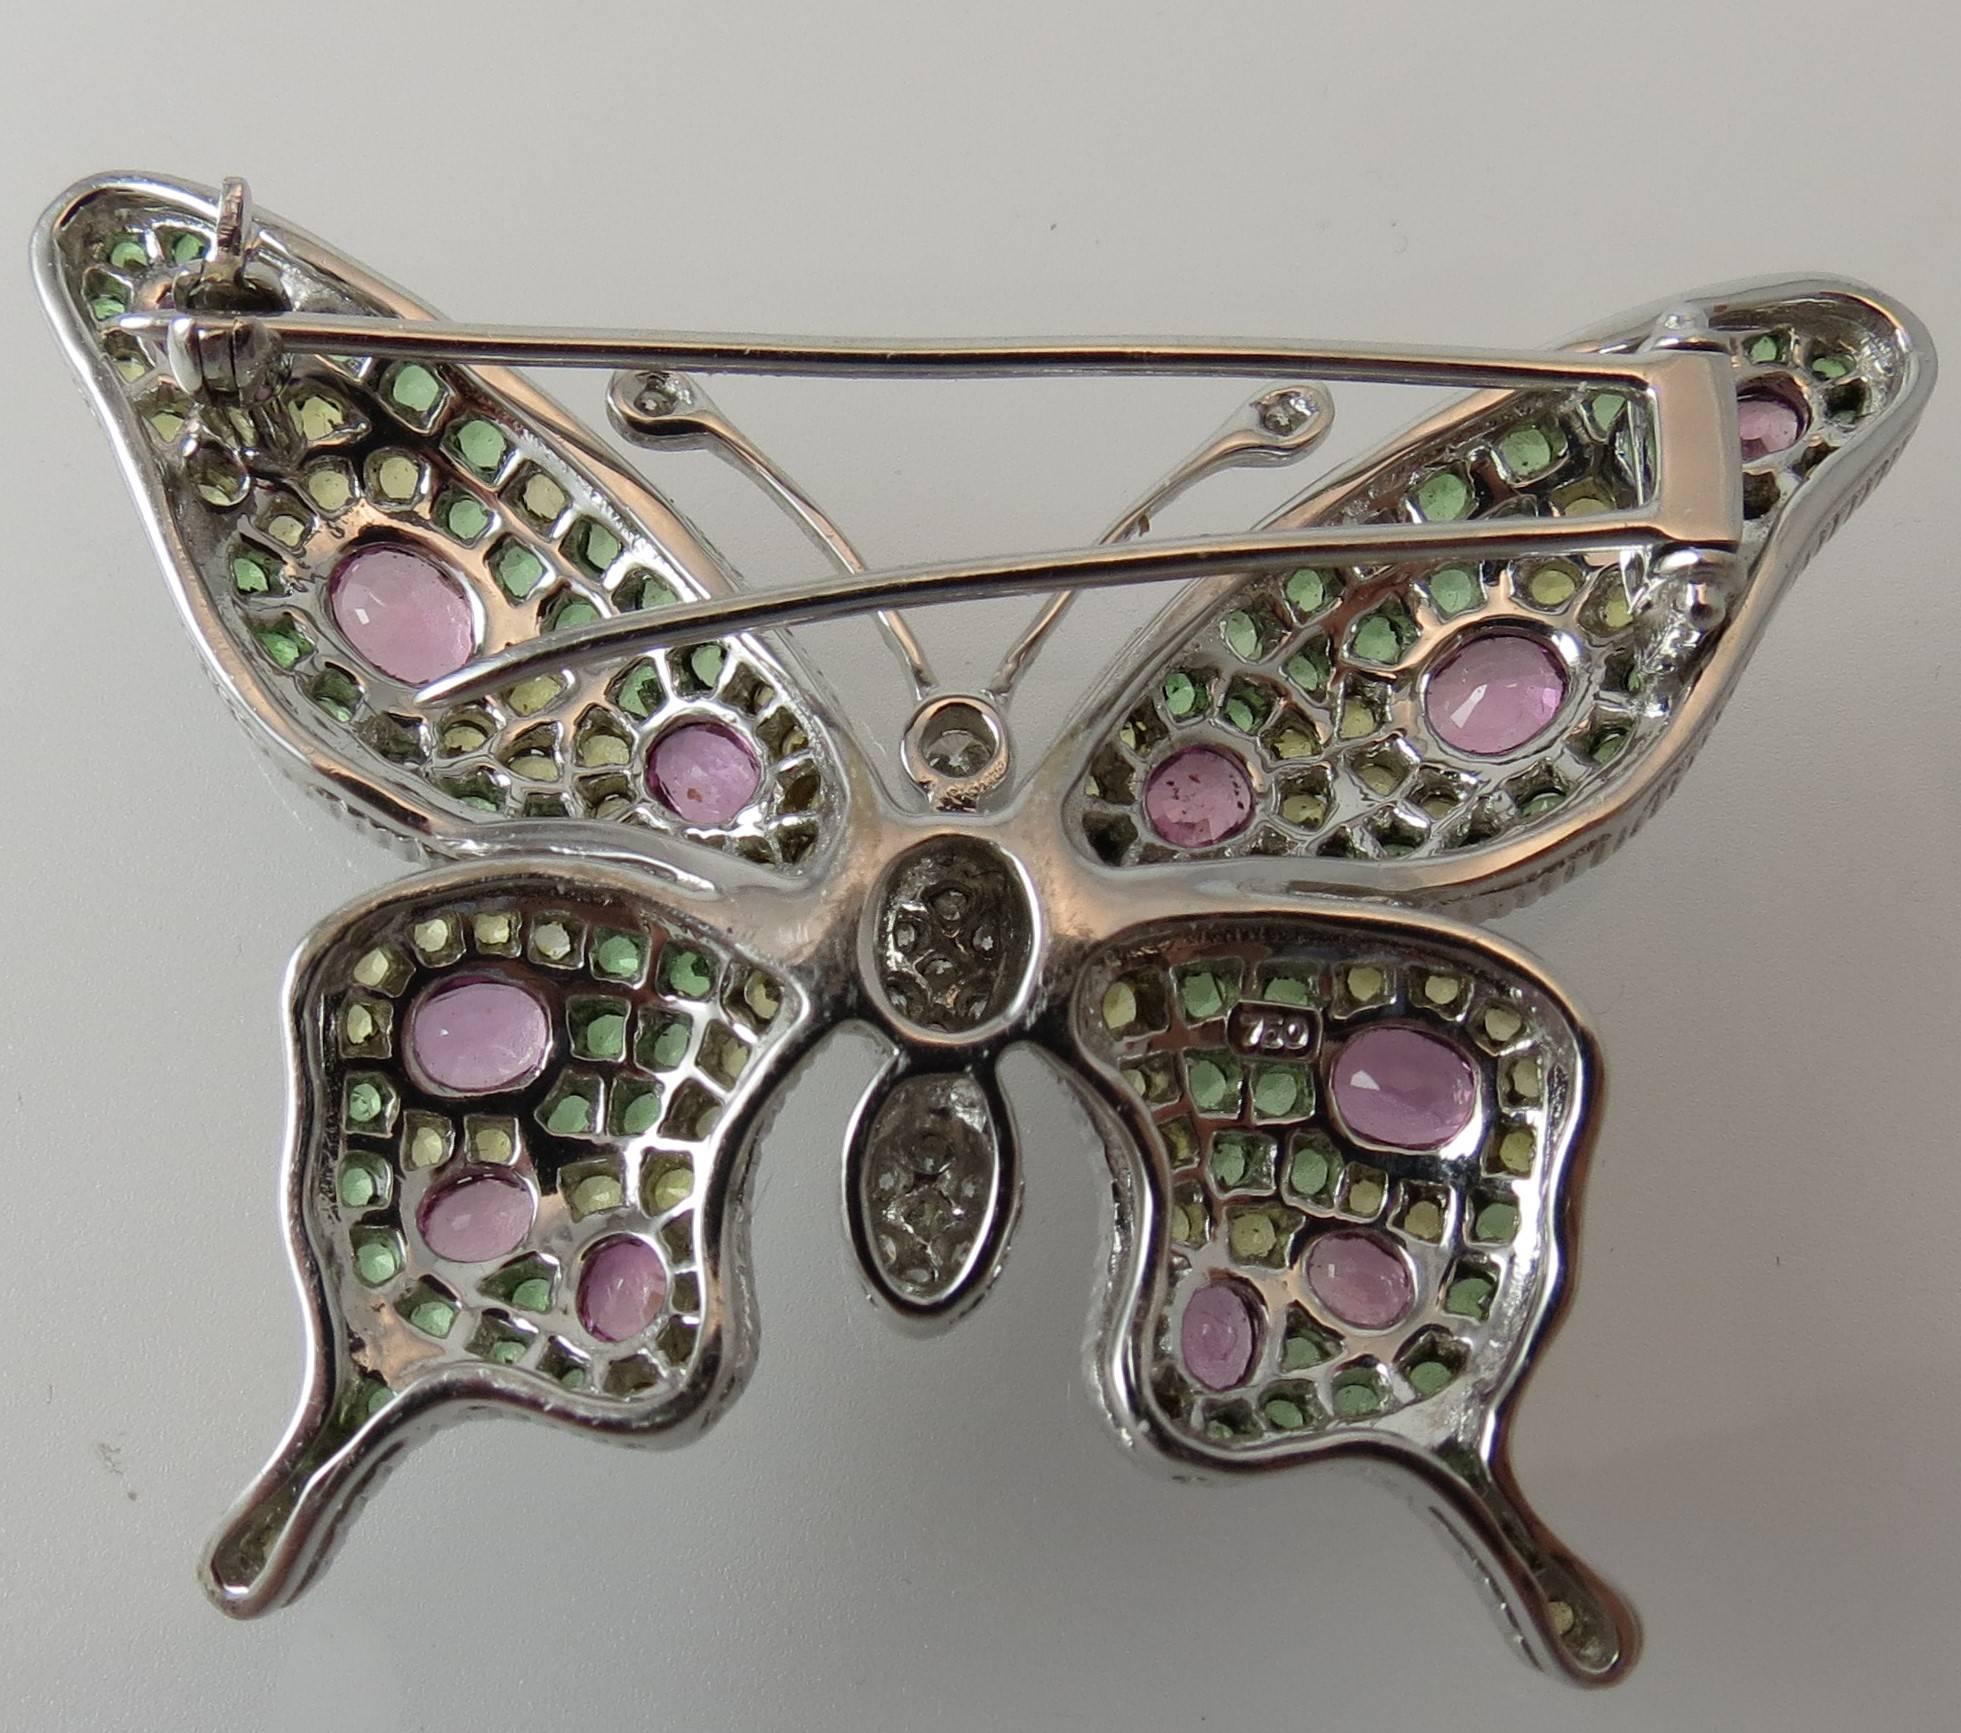 18K white gold Butterfly pin set with 17 round diamonds, pave set, weighing  .29cts,12 oval pink sapphires, prong set, weighing 2.71cts, 75 yellow sapphires, prong set, weighing 1.87cts and 70 tsavorites, prong set, weighing 2.23cts.